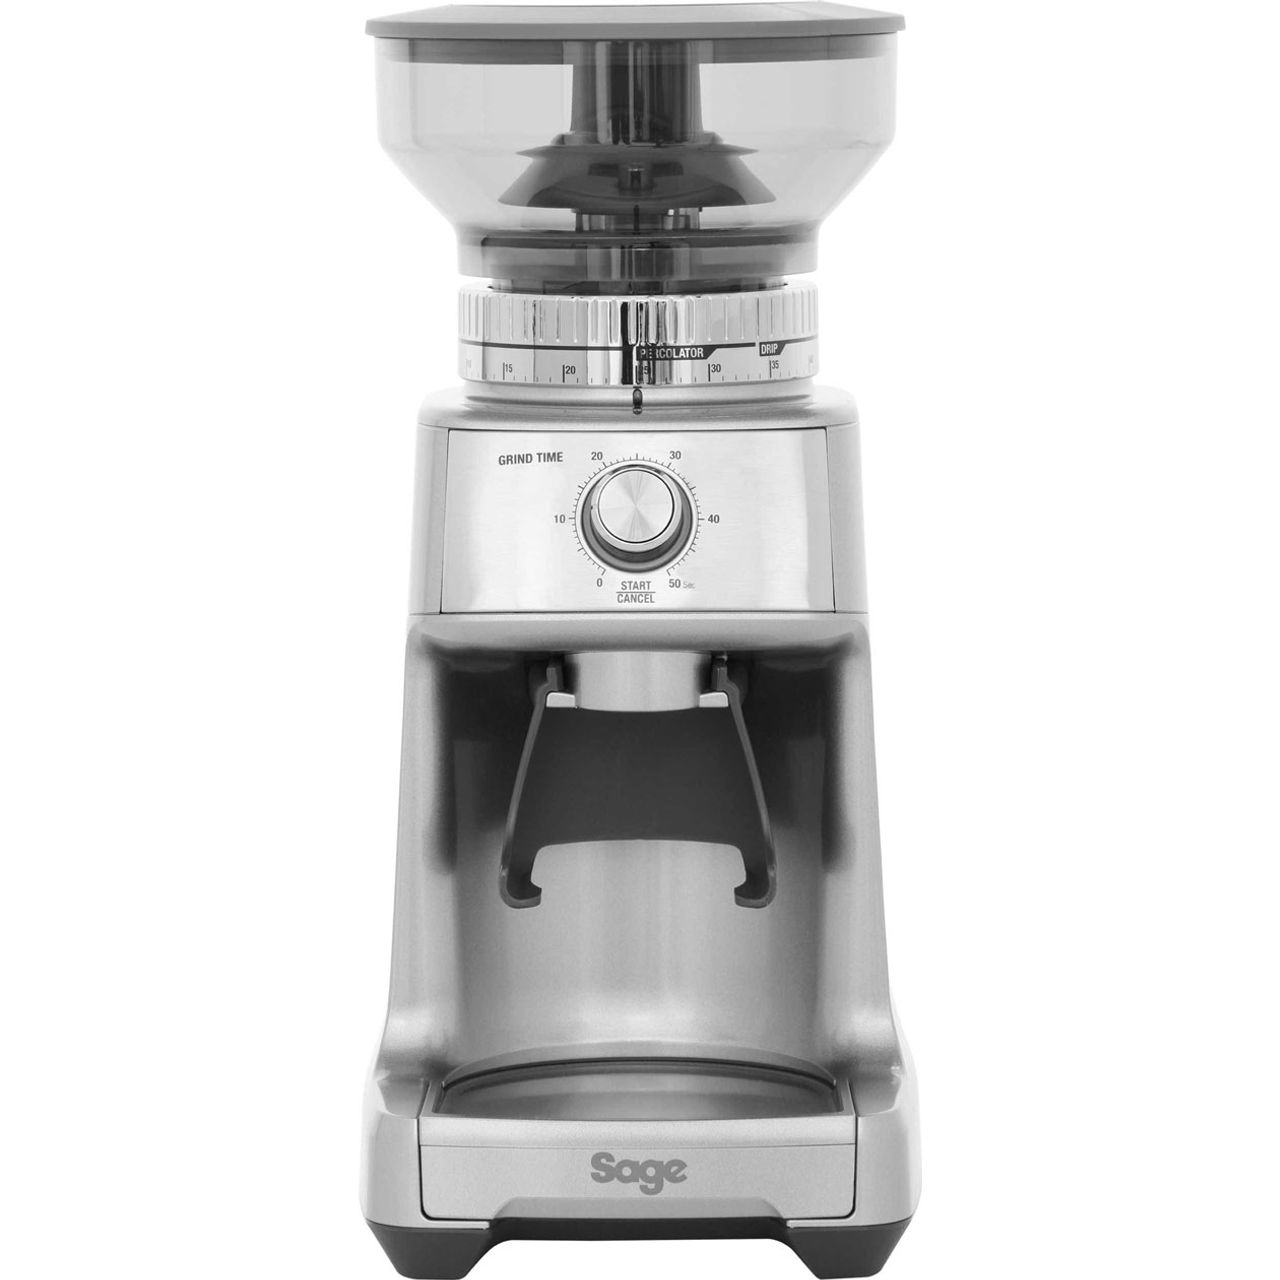 Sage The Dose Control Pro BCG600SIL Coffee Grinder Review